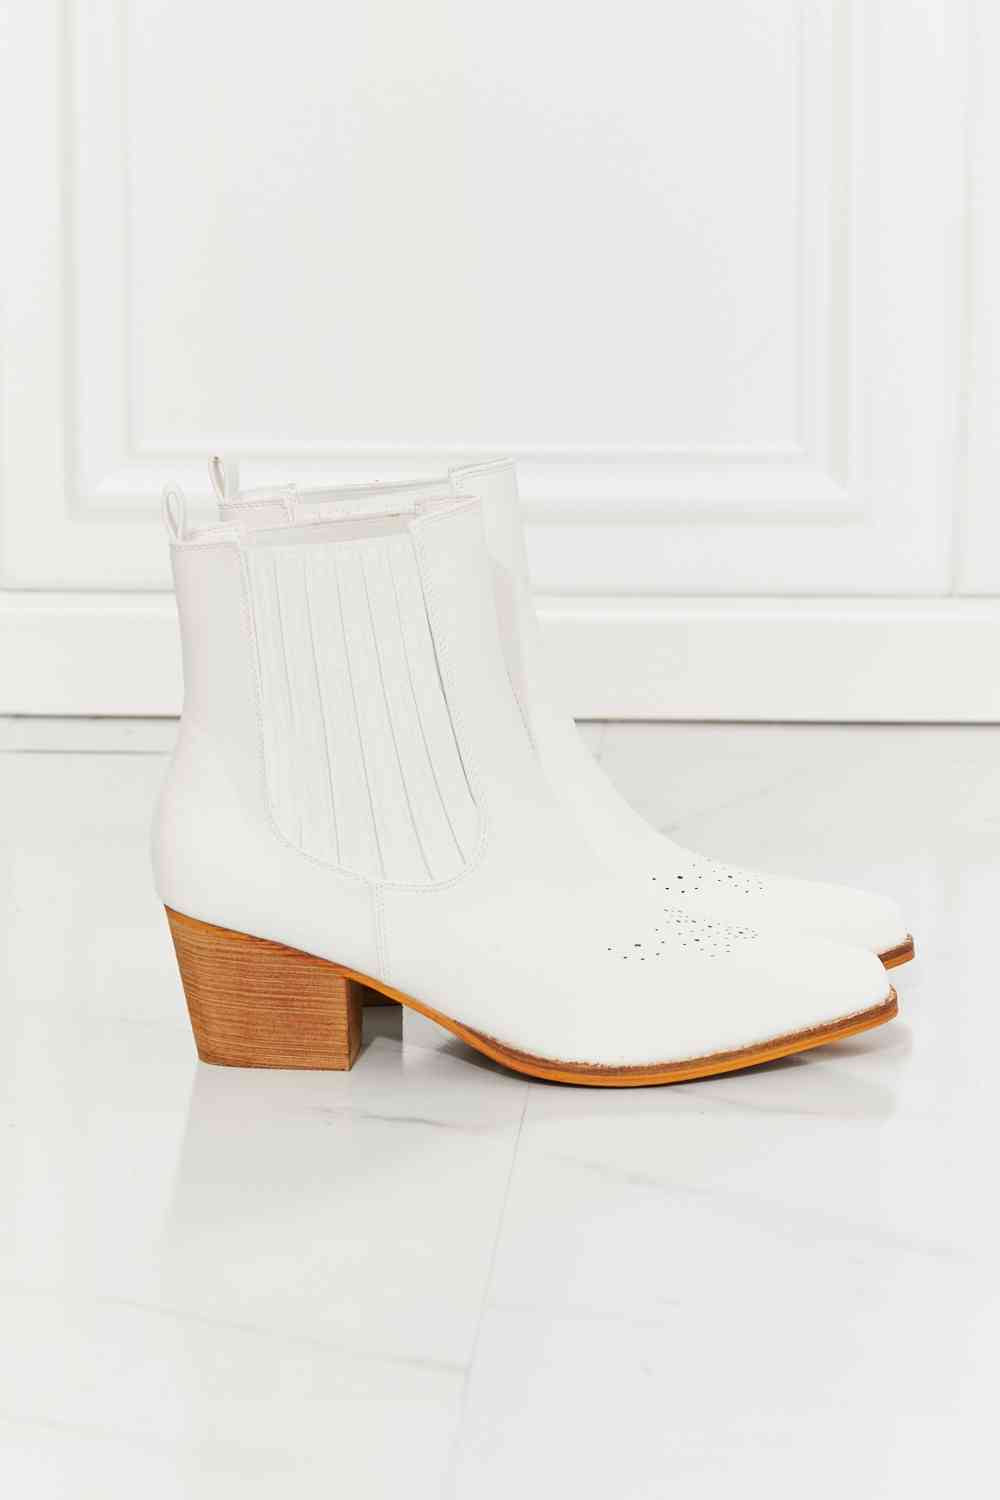 MMShoes Love the Journey Stacked Heel Chelsea Boot in White - Alonna's Legging Land